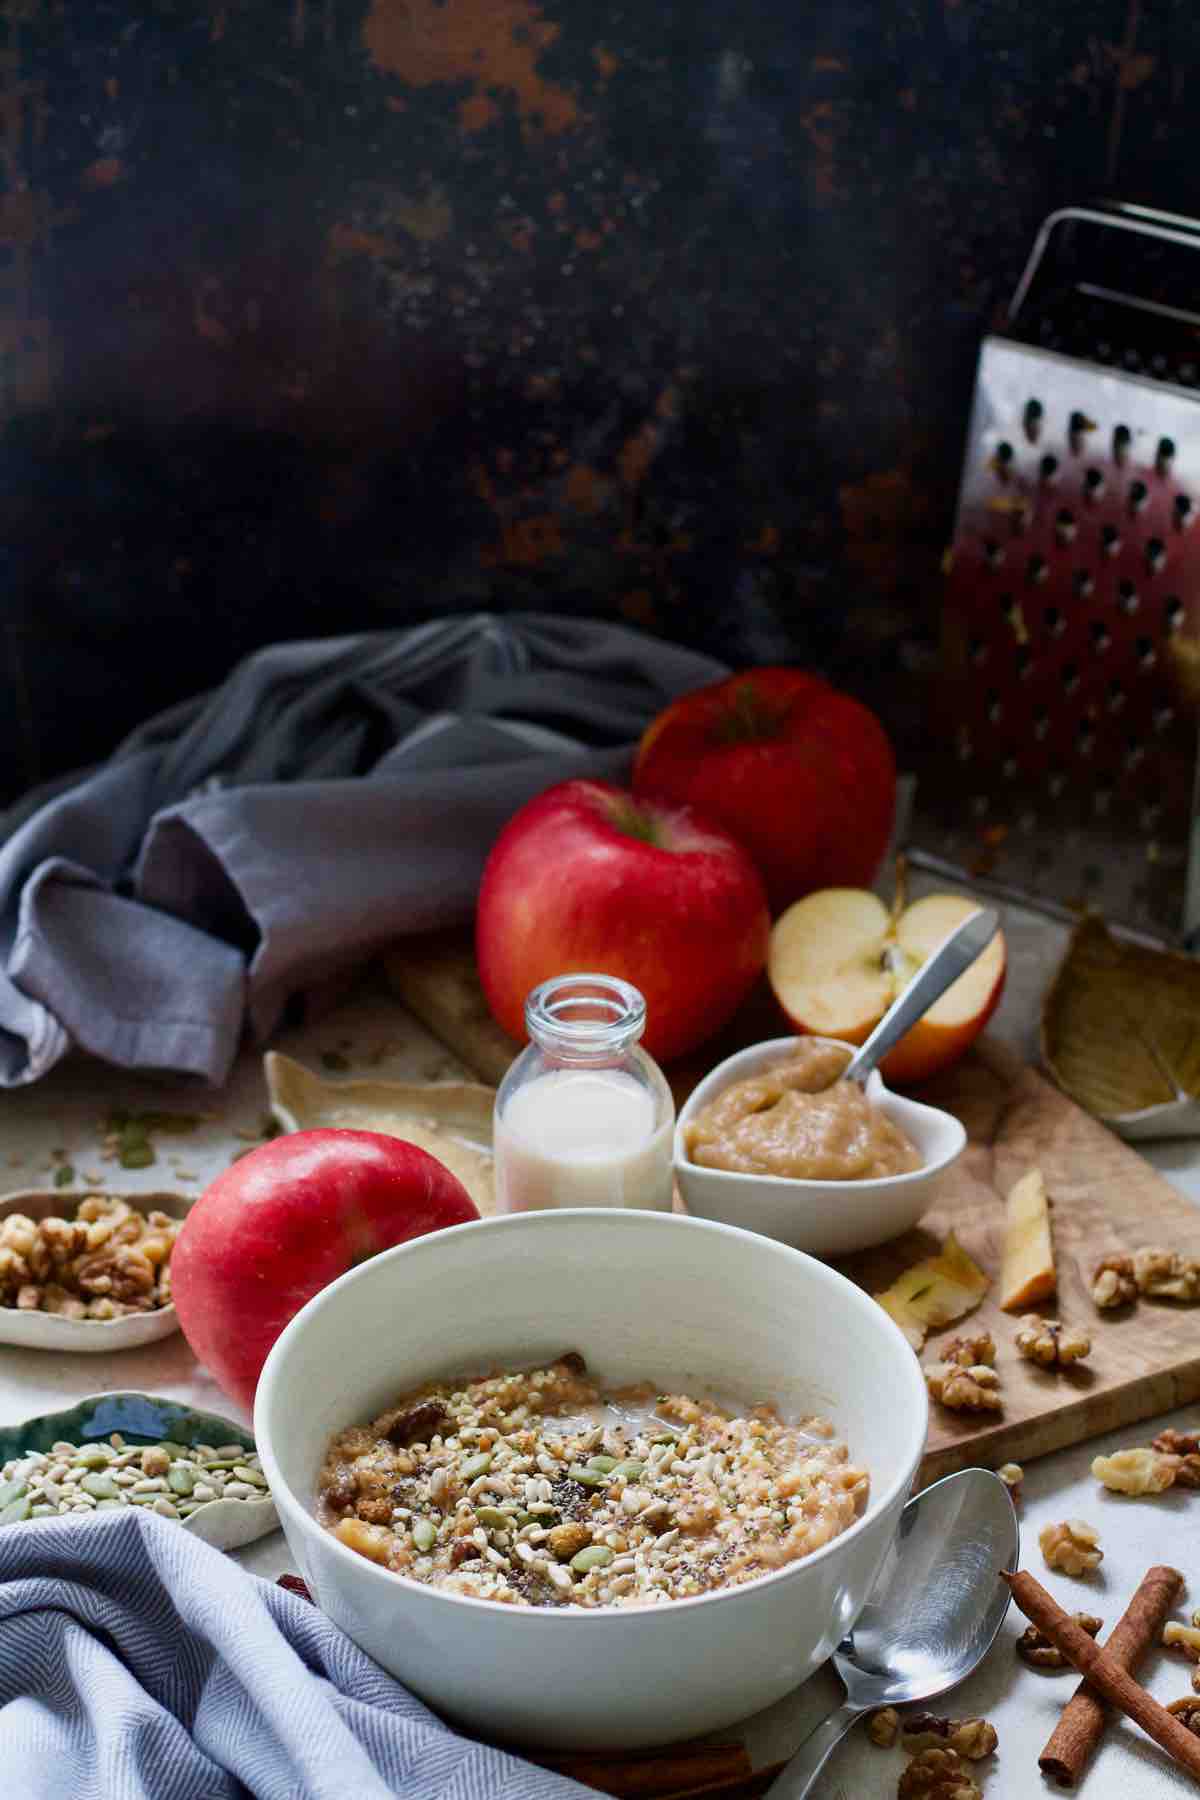 Breakfast setup with bowl of porridge, apples, plant milk, nuts, seeds and spices.